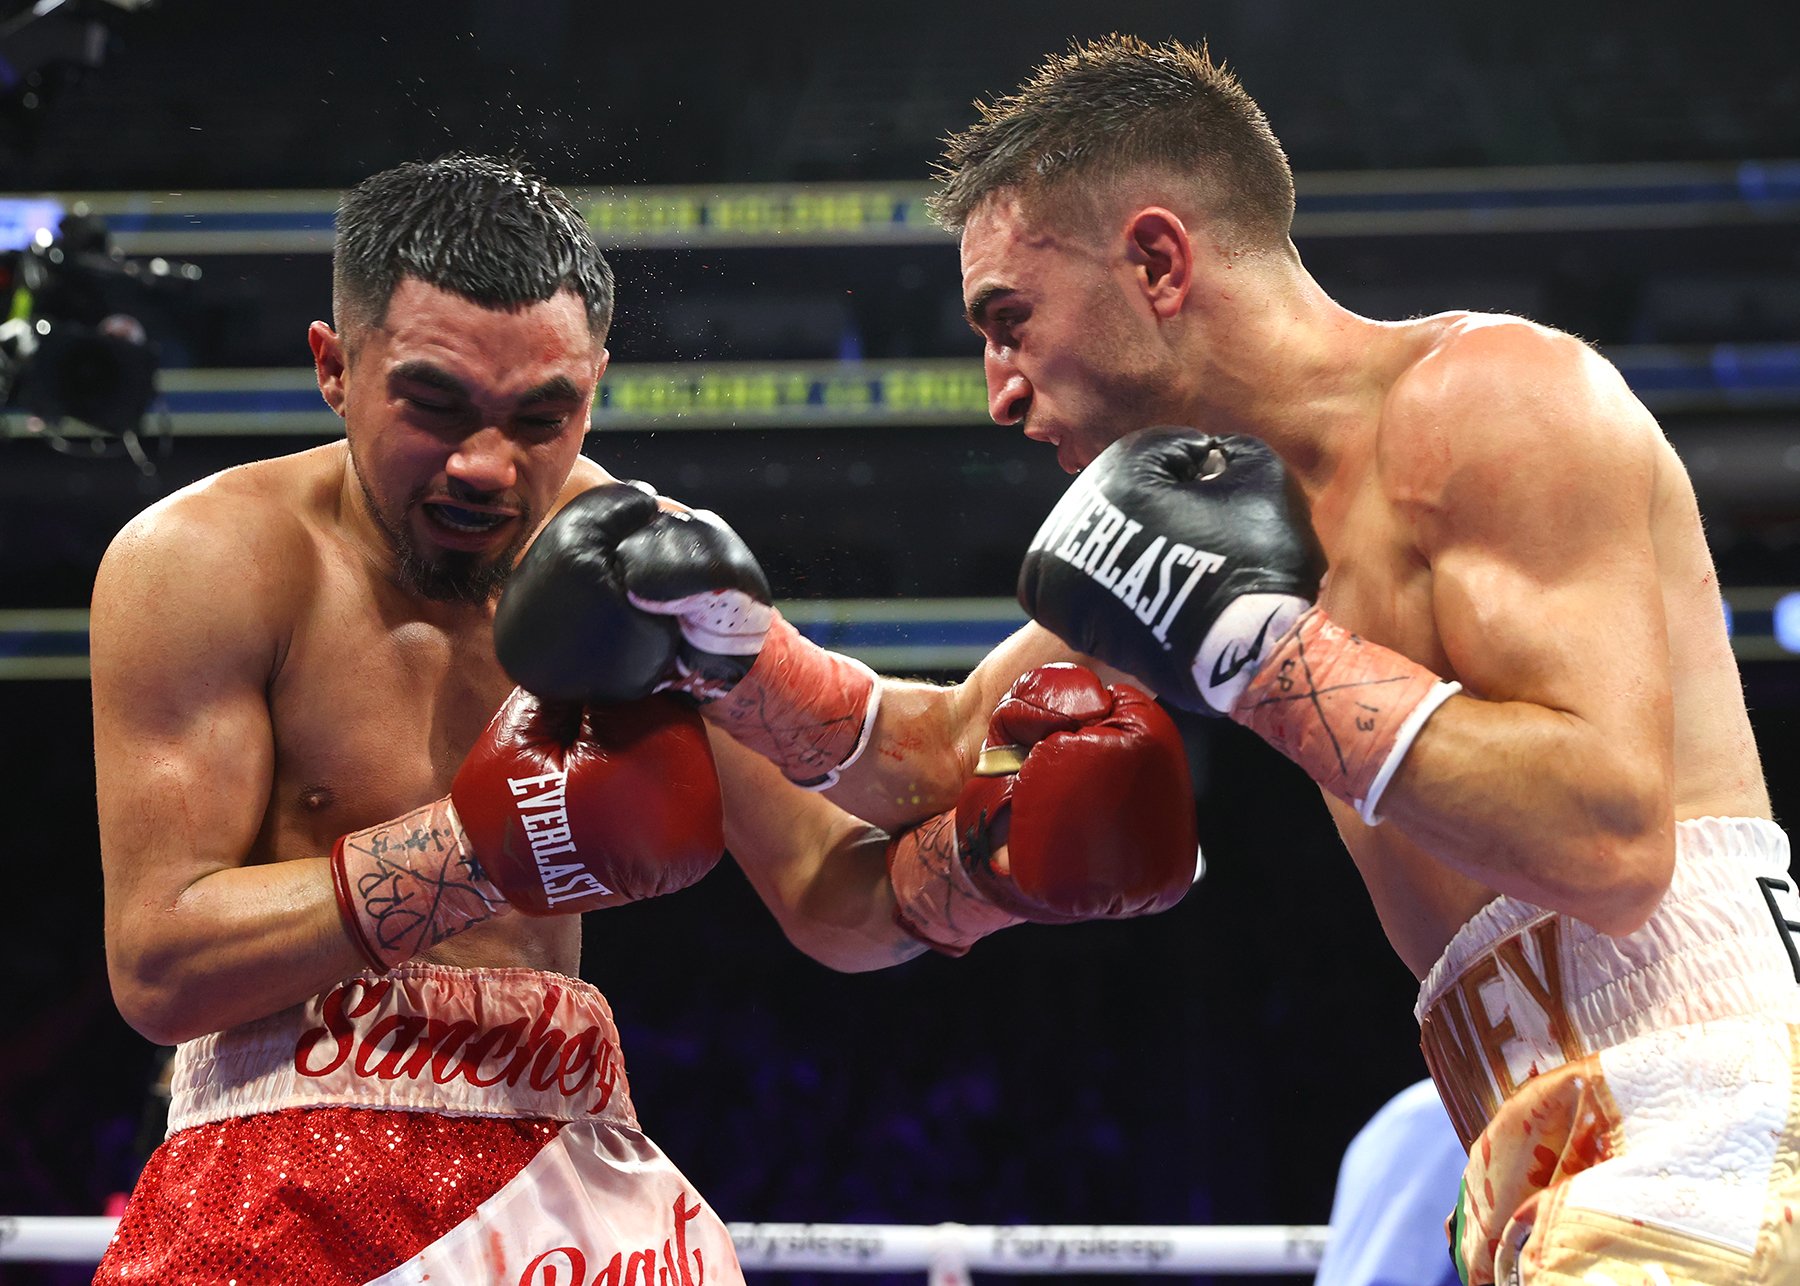 Jason Moloney on his fight vs Saul Sanchez: ‘As a fighter you want these special fights’